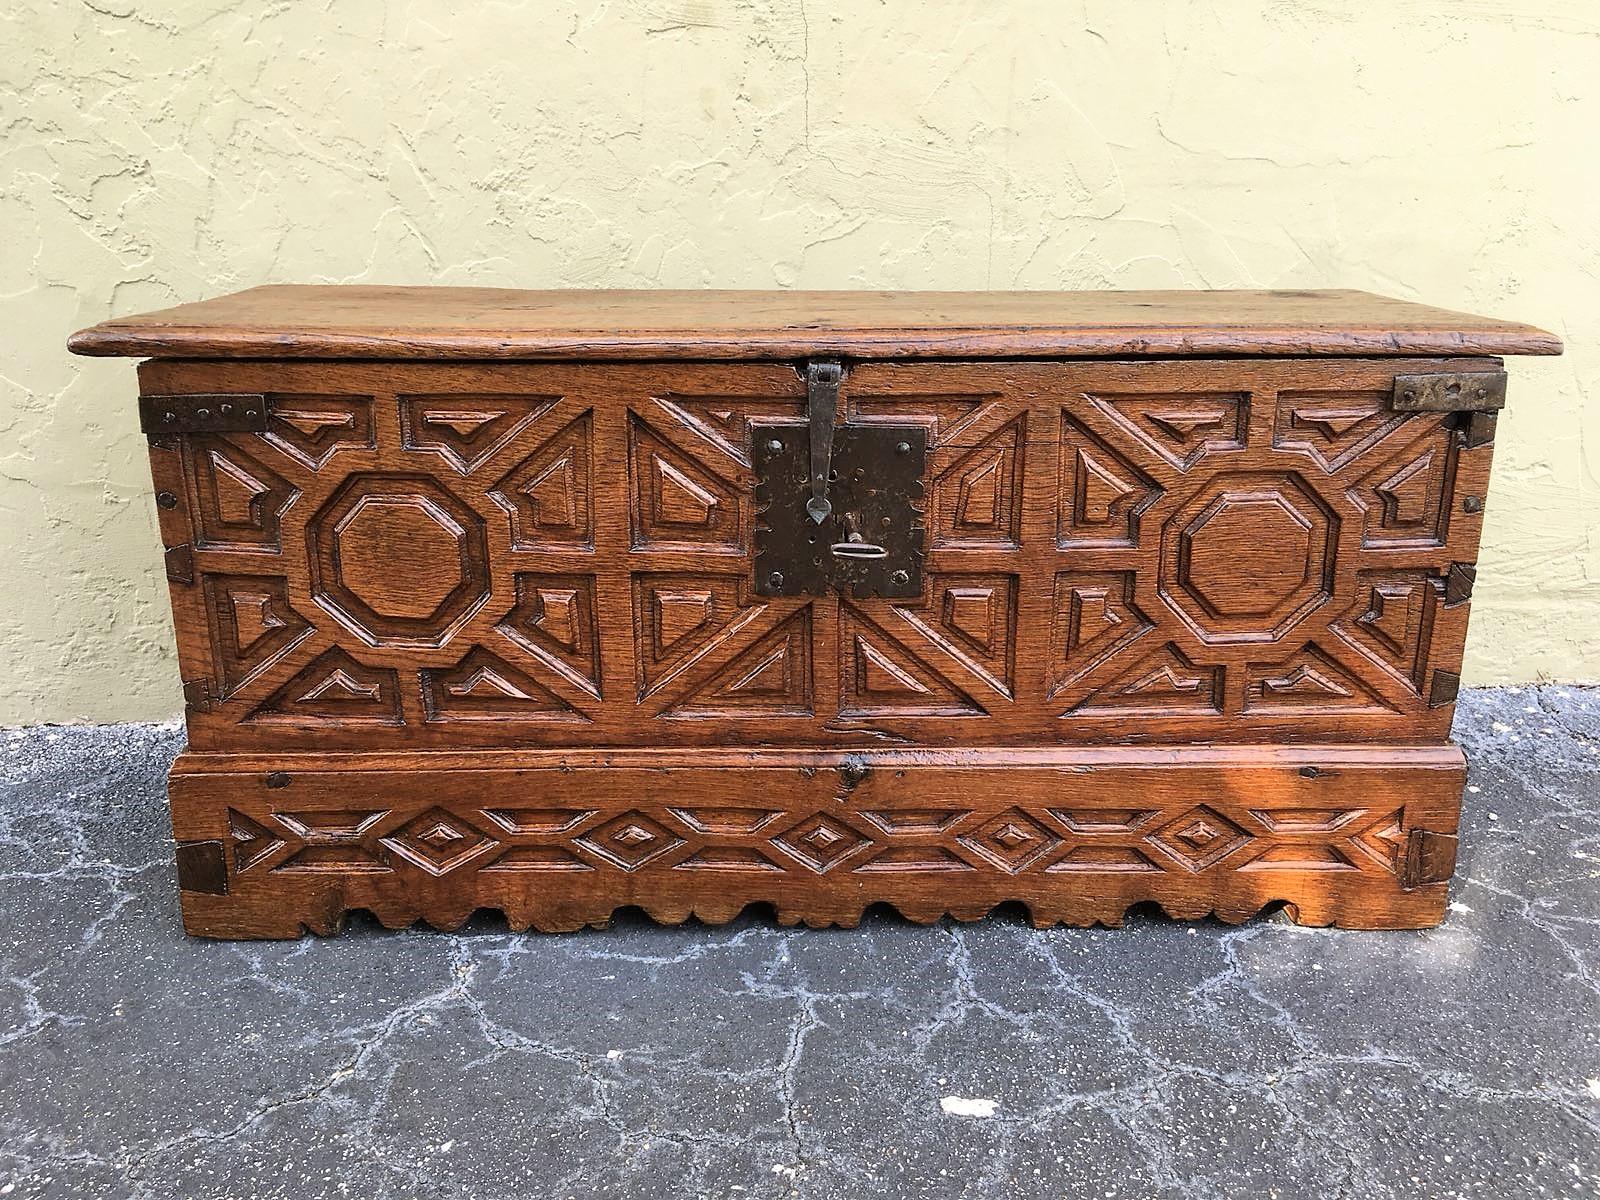 A Spanish 18th century wood coffer. This Spanish trunk from the 18th century features beautifully visible dovetail joints down each corner side and a scalloped skirt which is adorned with geometrical carvings. The trunk's interior offers a large